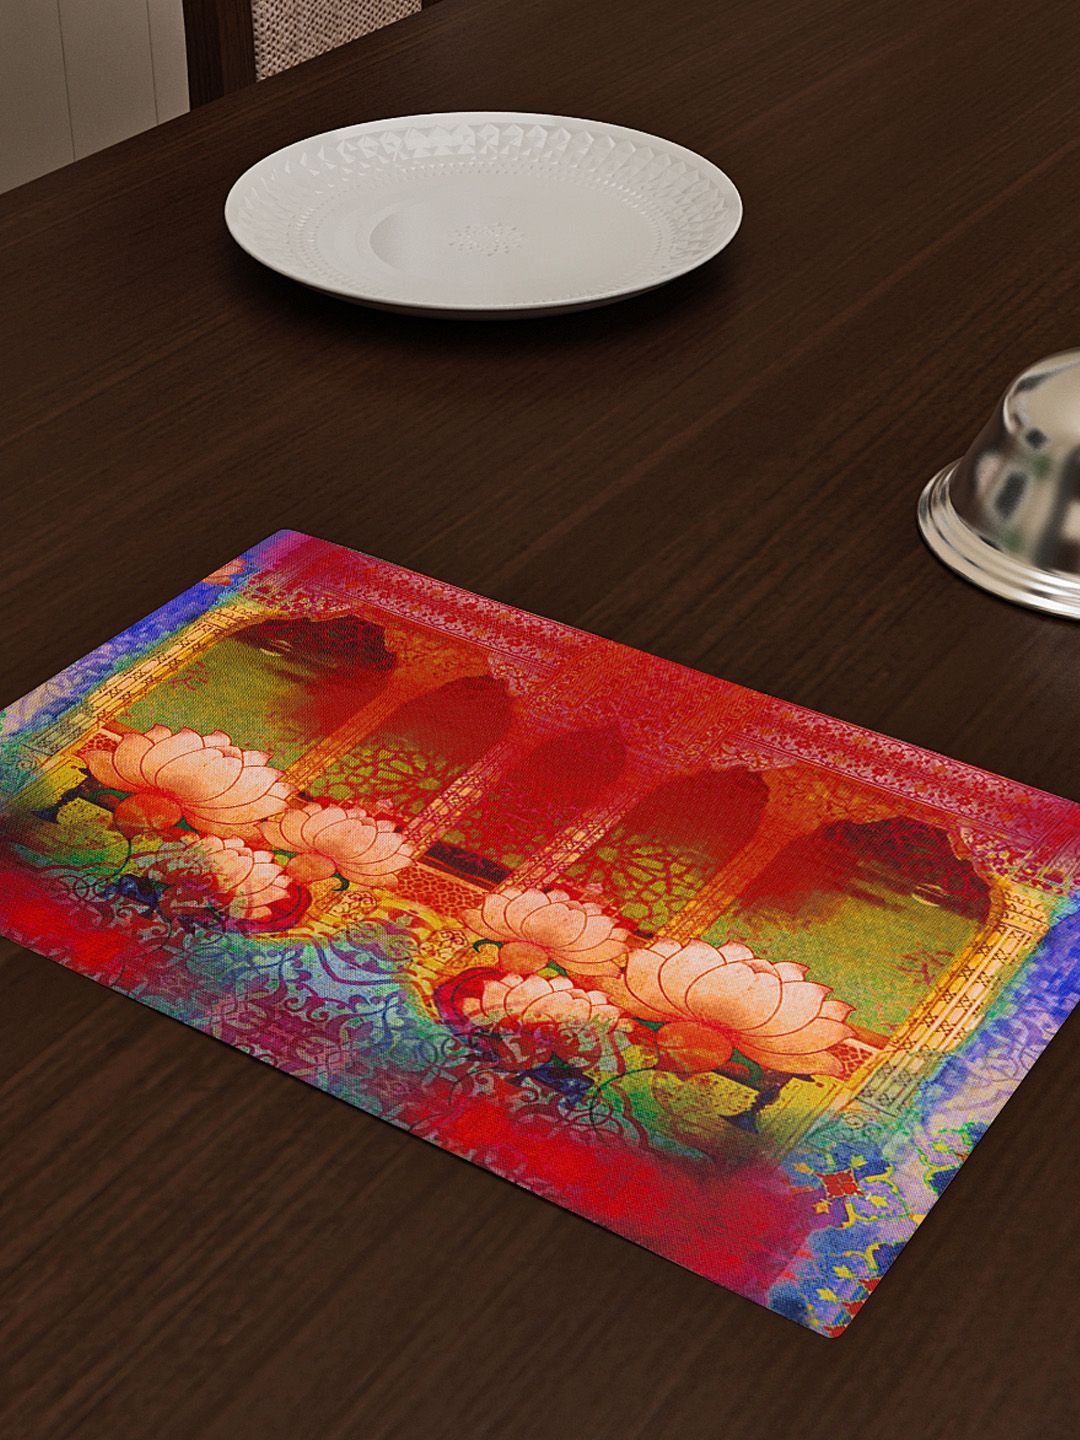 SEJ by Nisha Gupta Red Set of 4 Printed Table Placemats Price in India